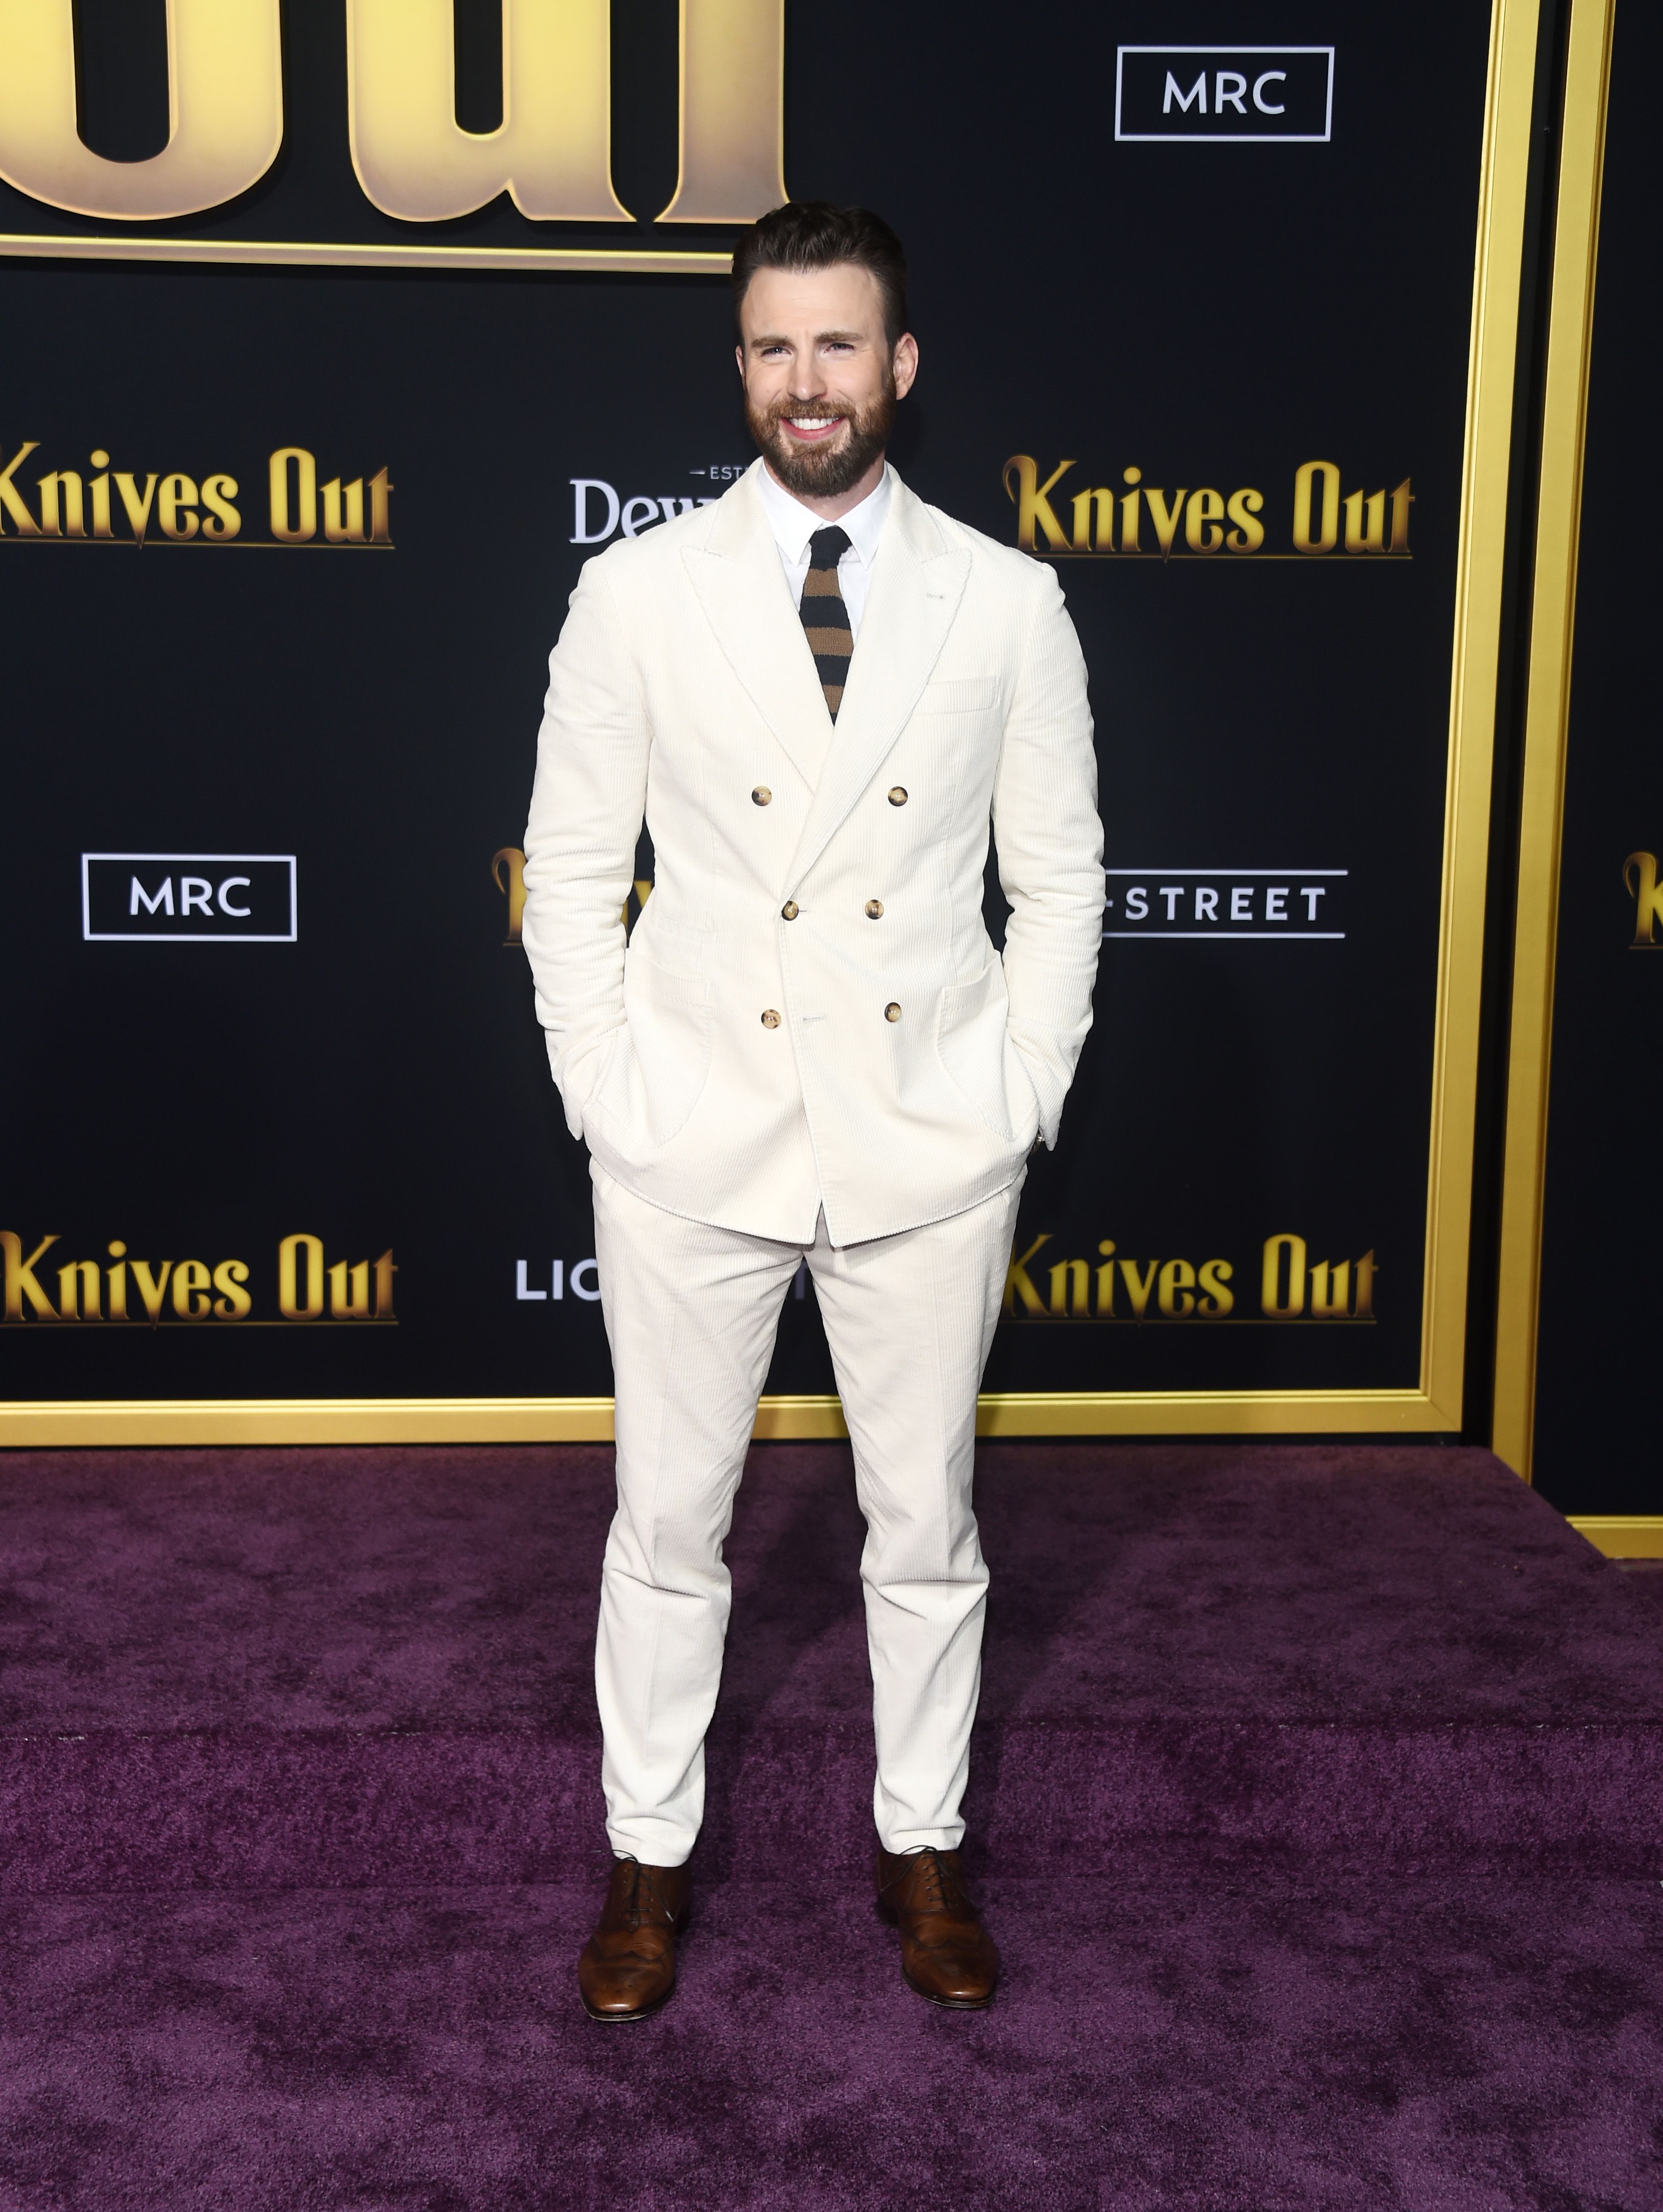 Jason Sudeikis' Emmys 2021 suit compared to Chris Evans' Oscars look